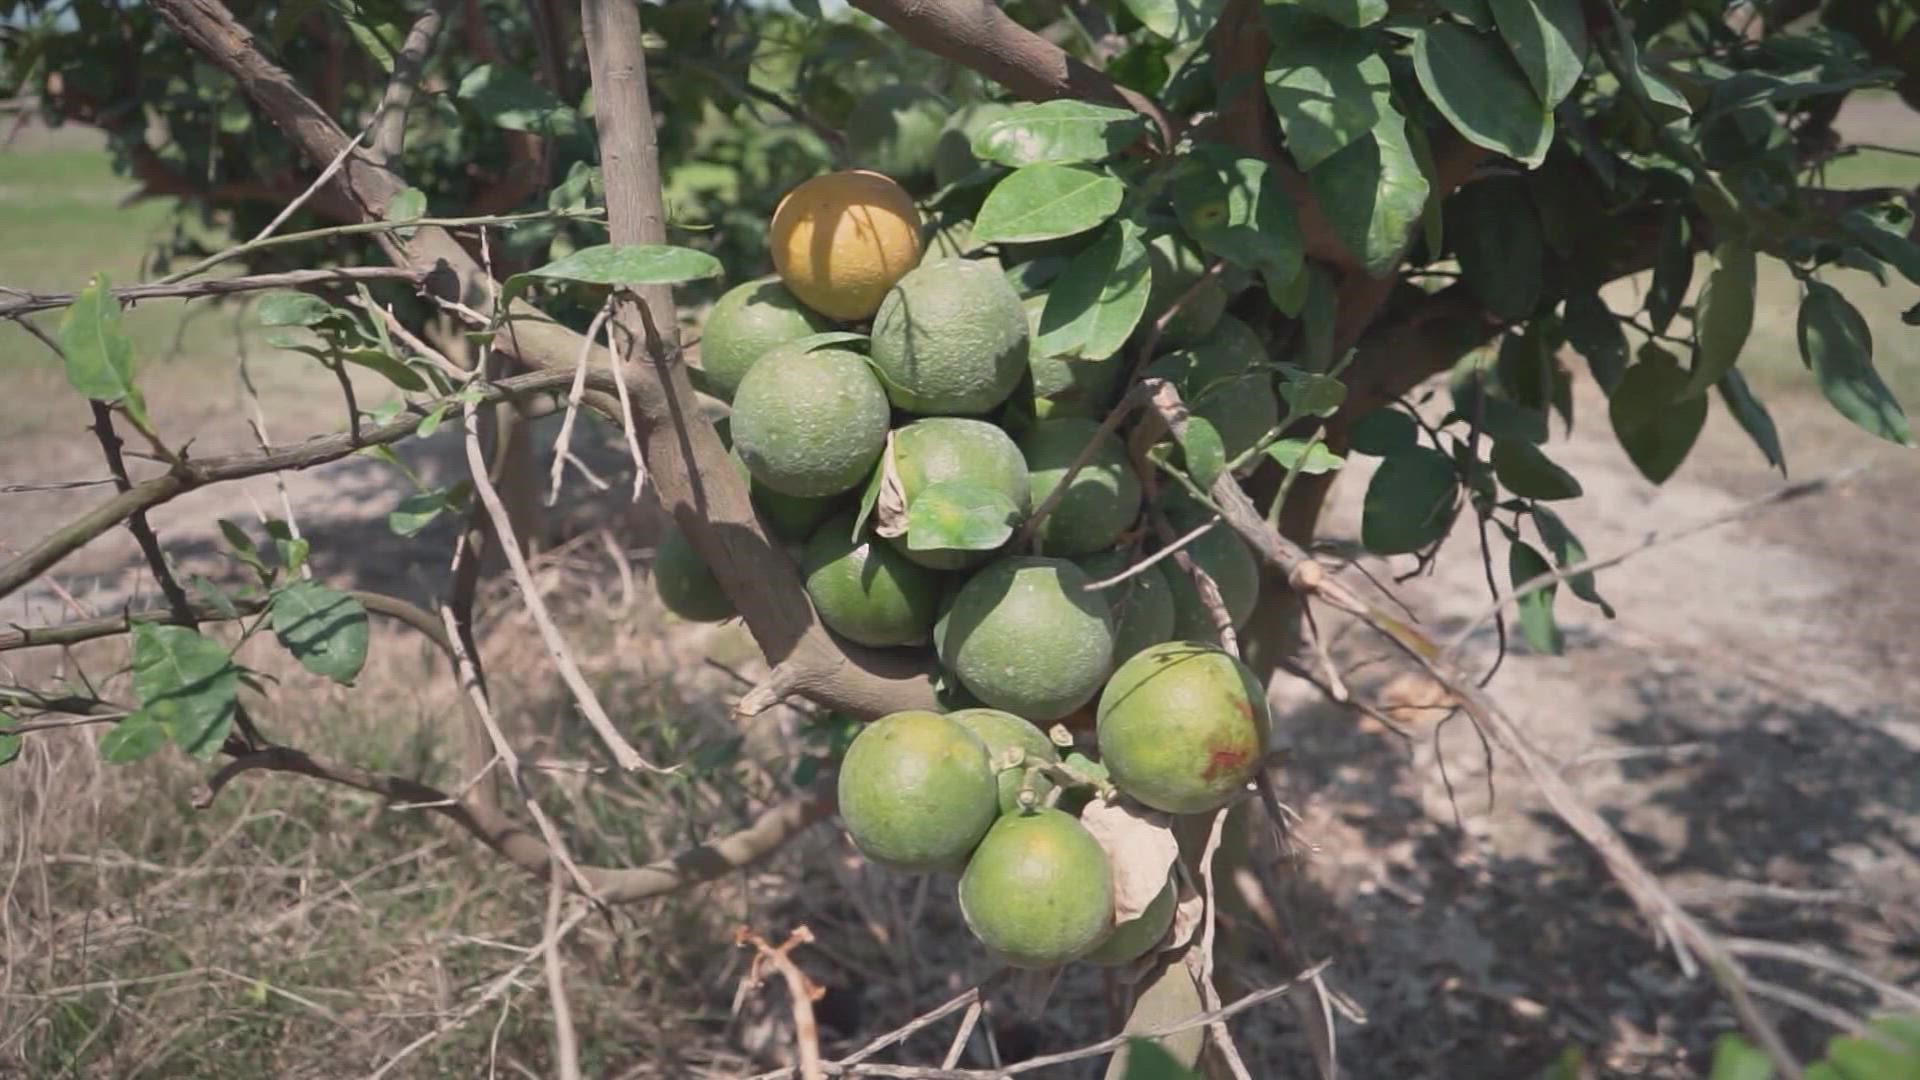 Citrus growers in South Texas are looking at the sunny side of several severe weather disasters. A look at the bitter challenges one man has faced.